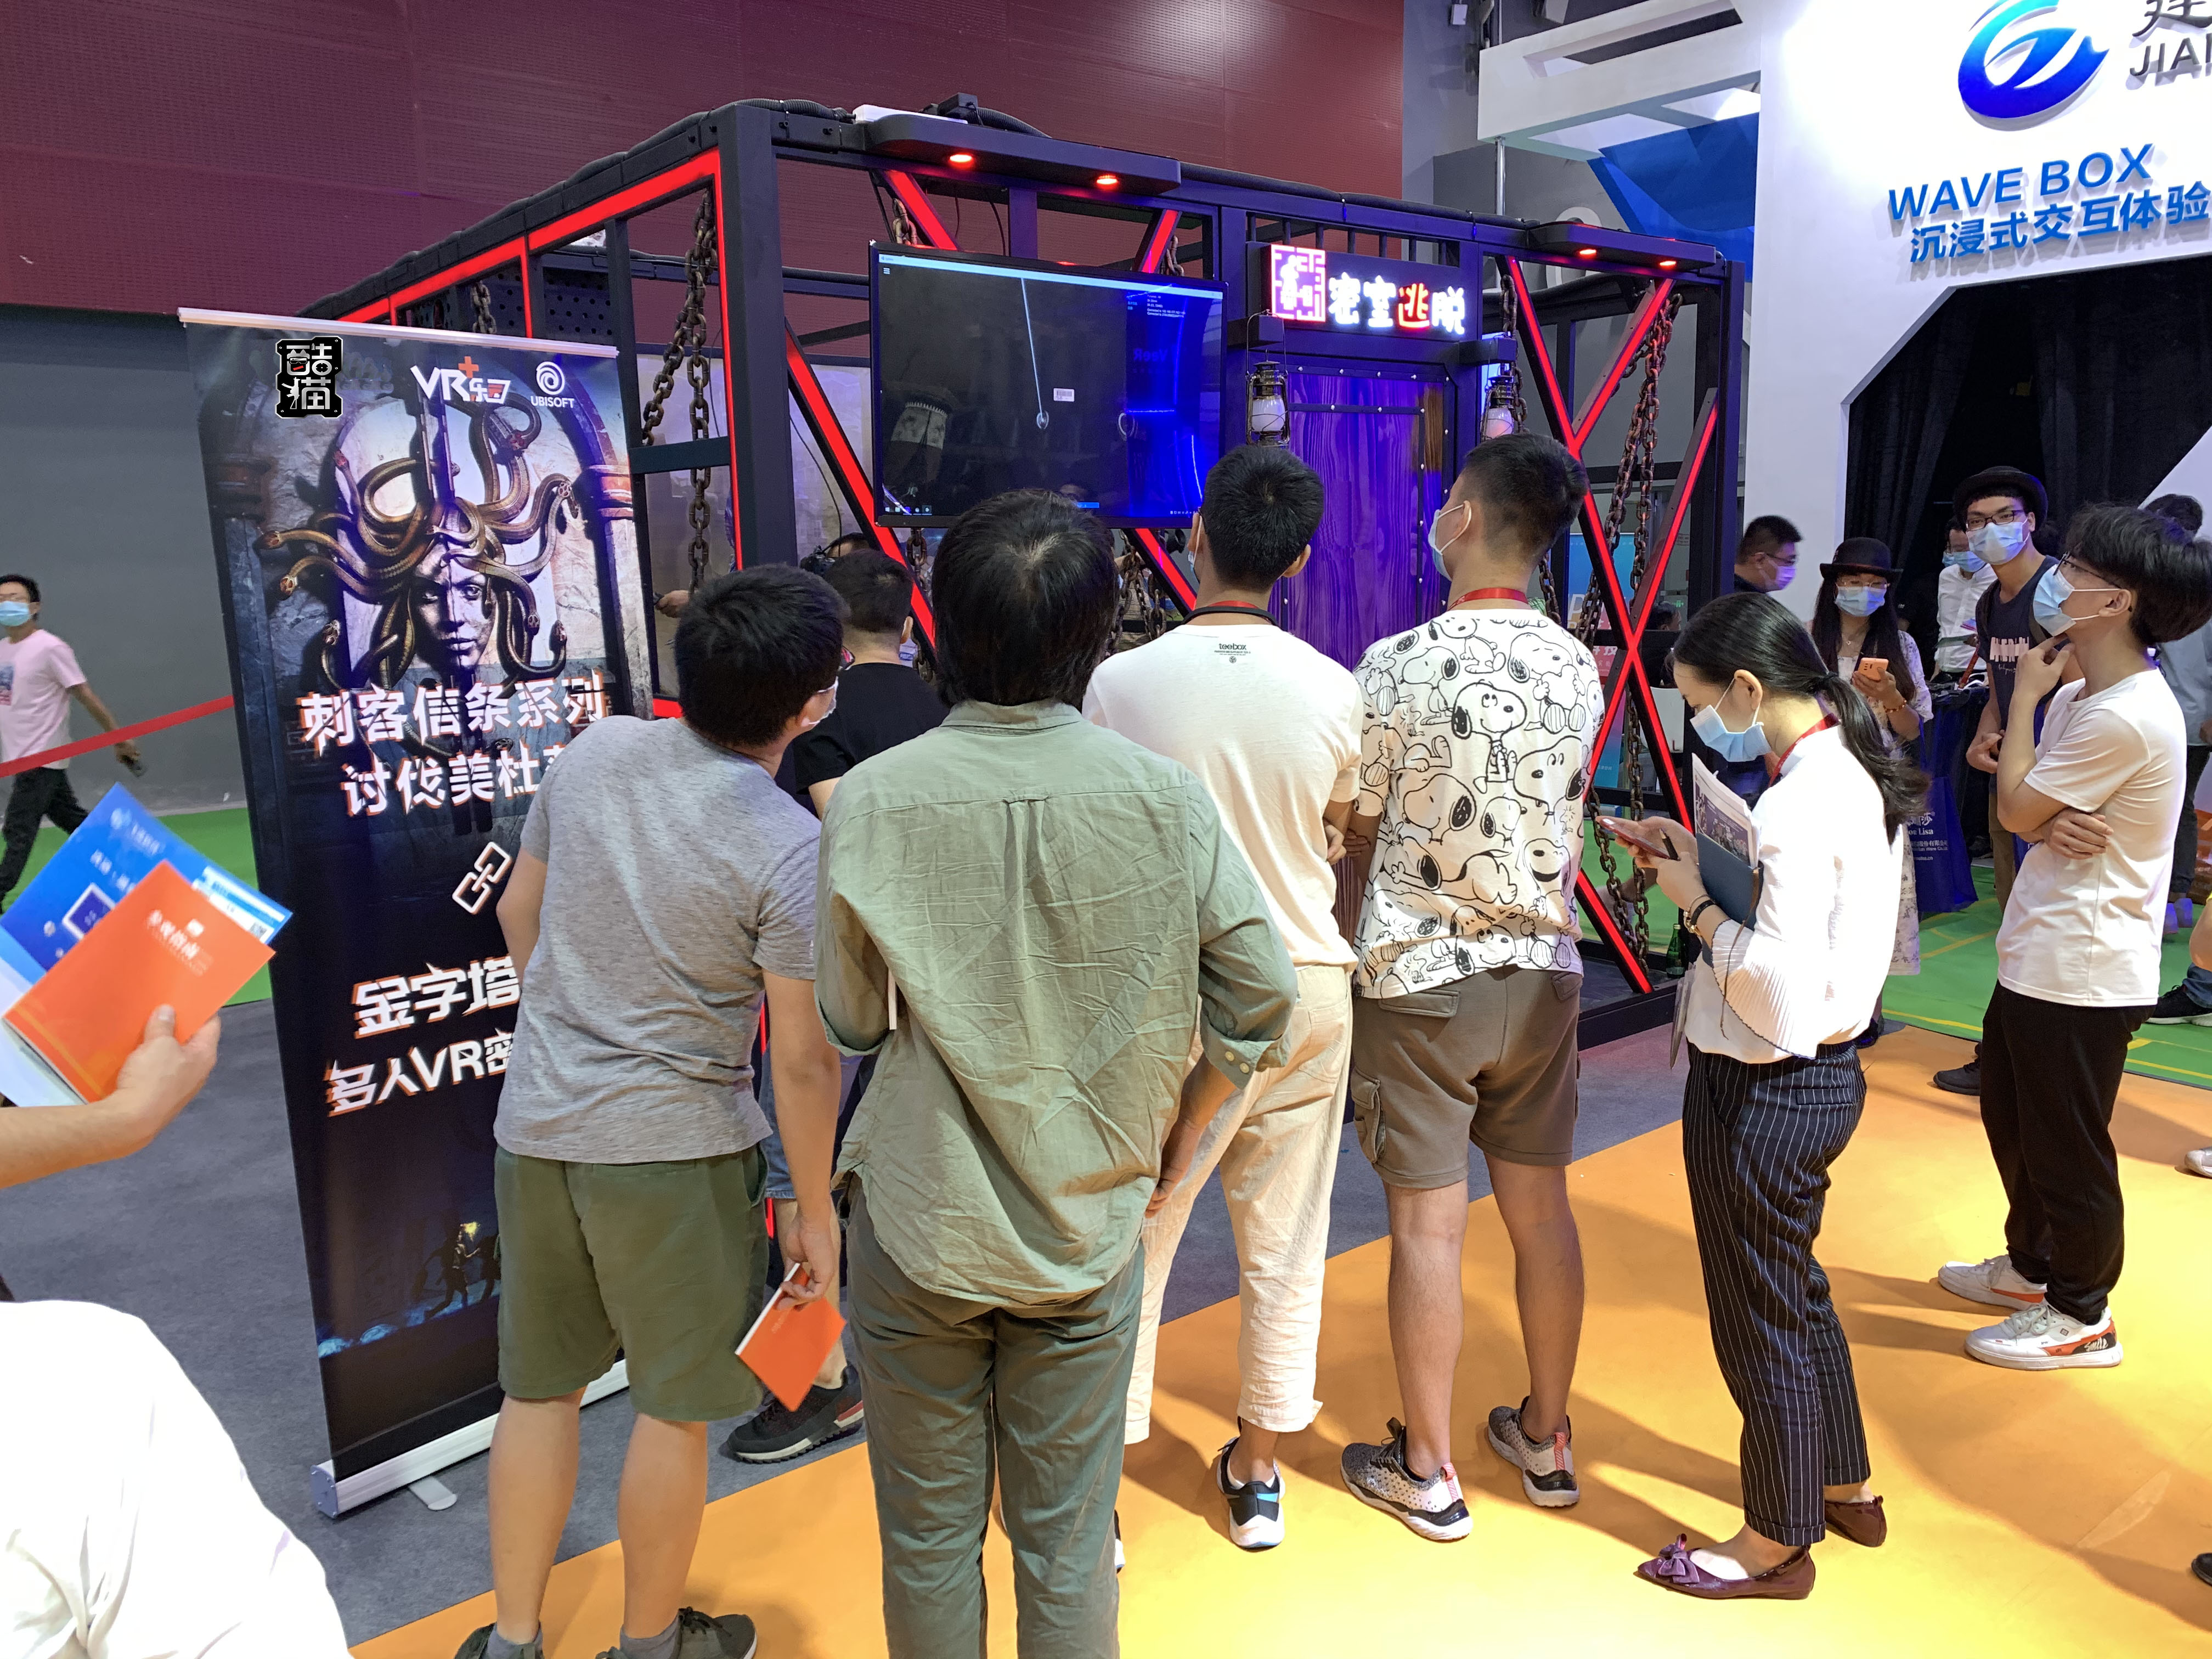 9D Virtual Reality Multiplayer VR Arcade Fighting Game Machine 9dvr Simulate Escape Room Game